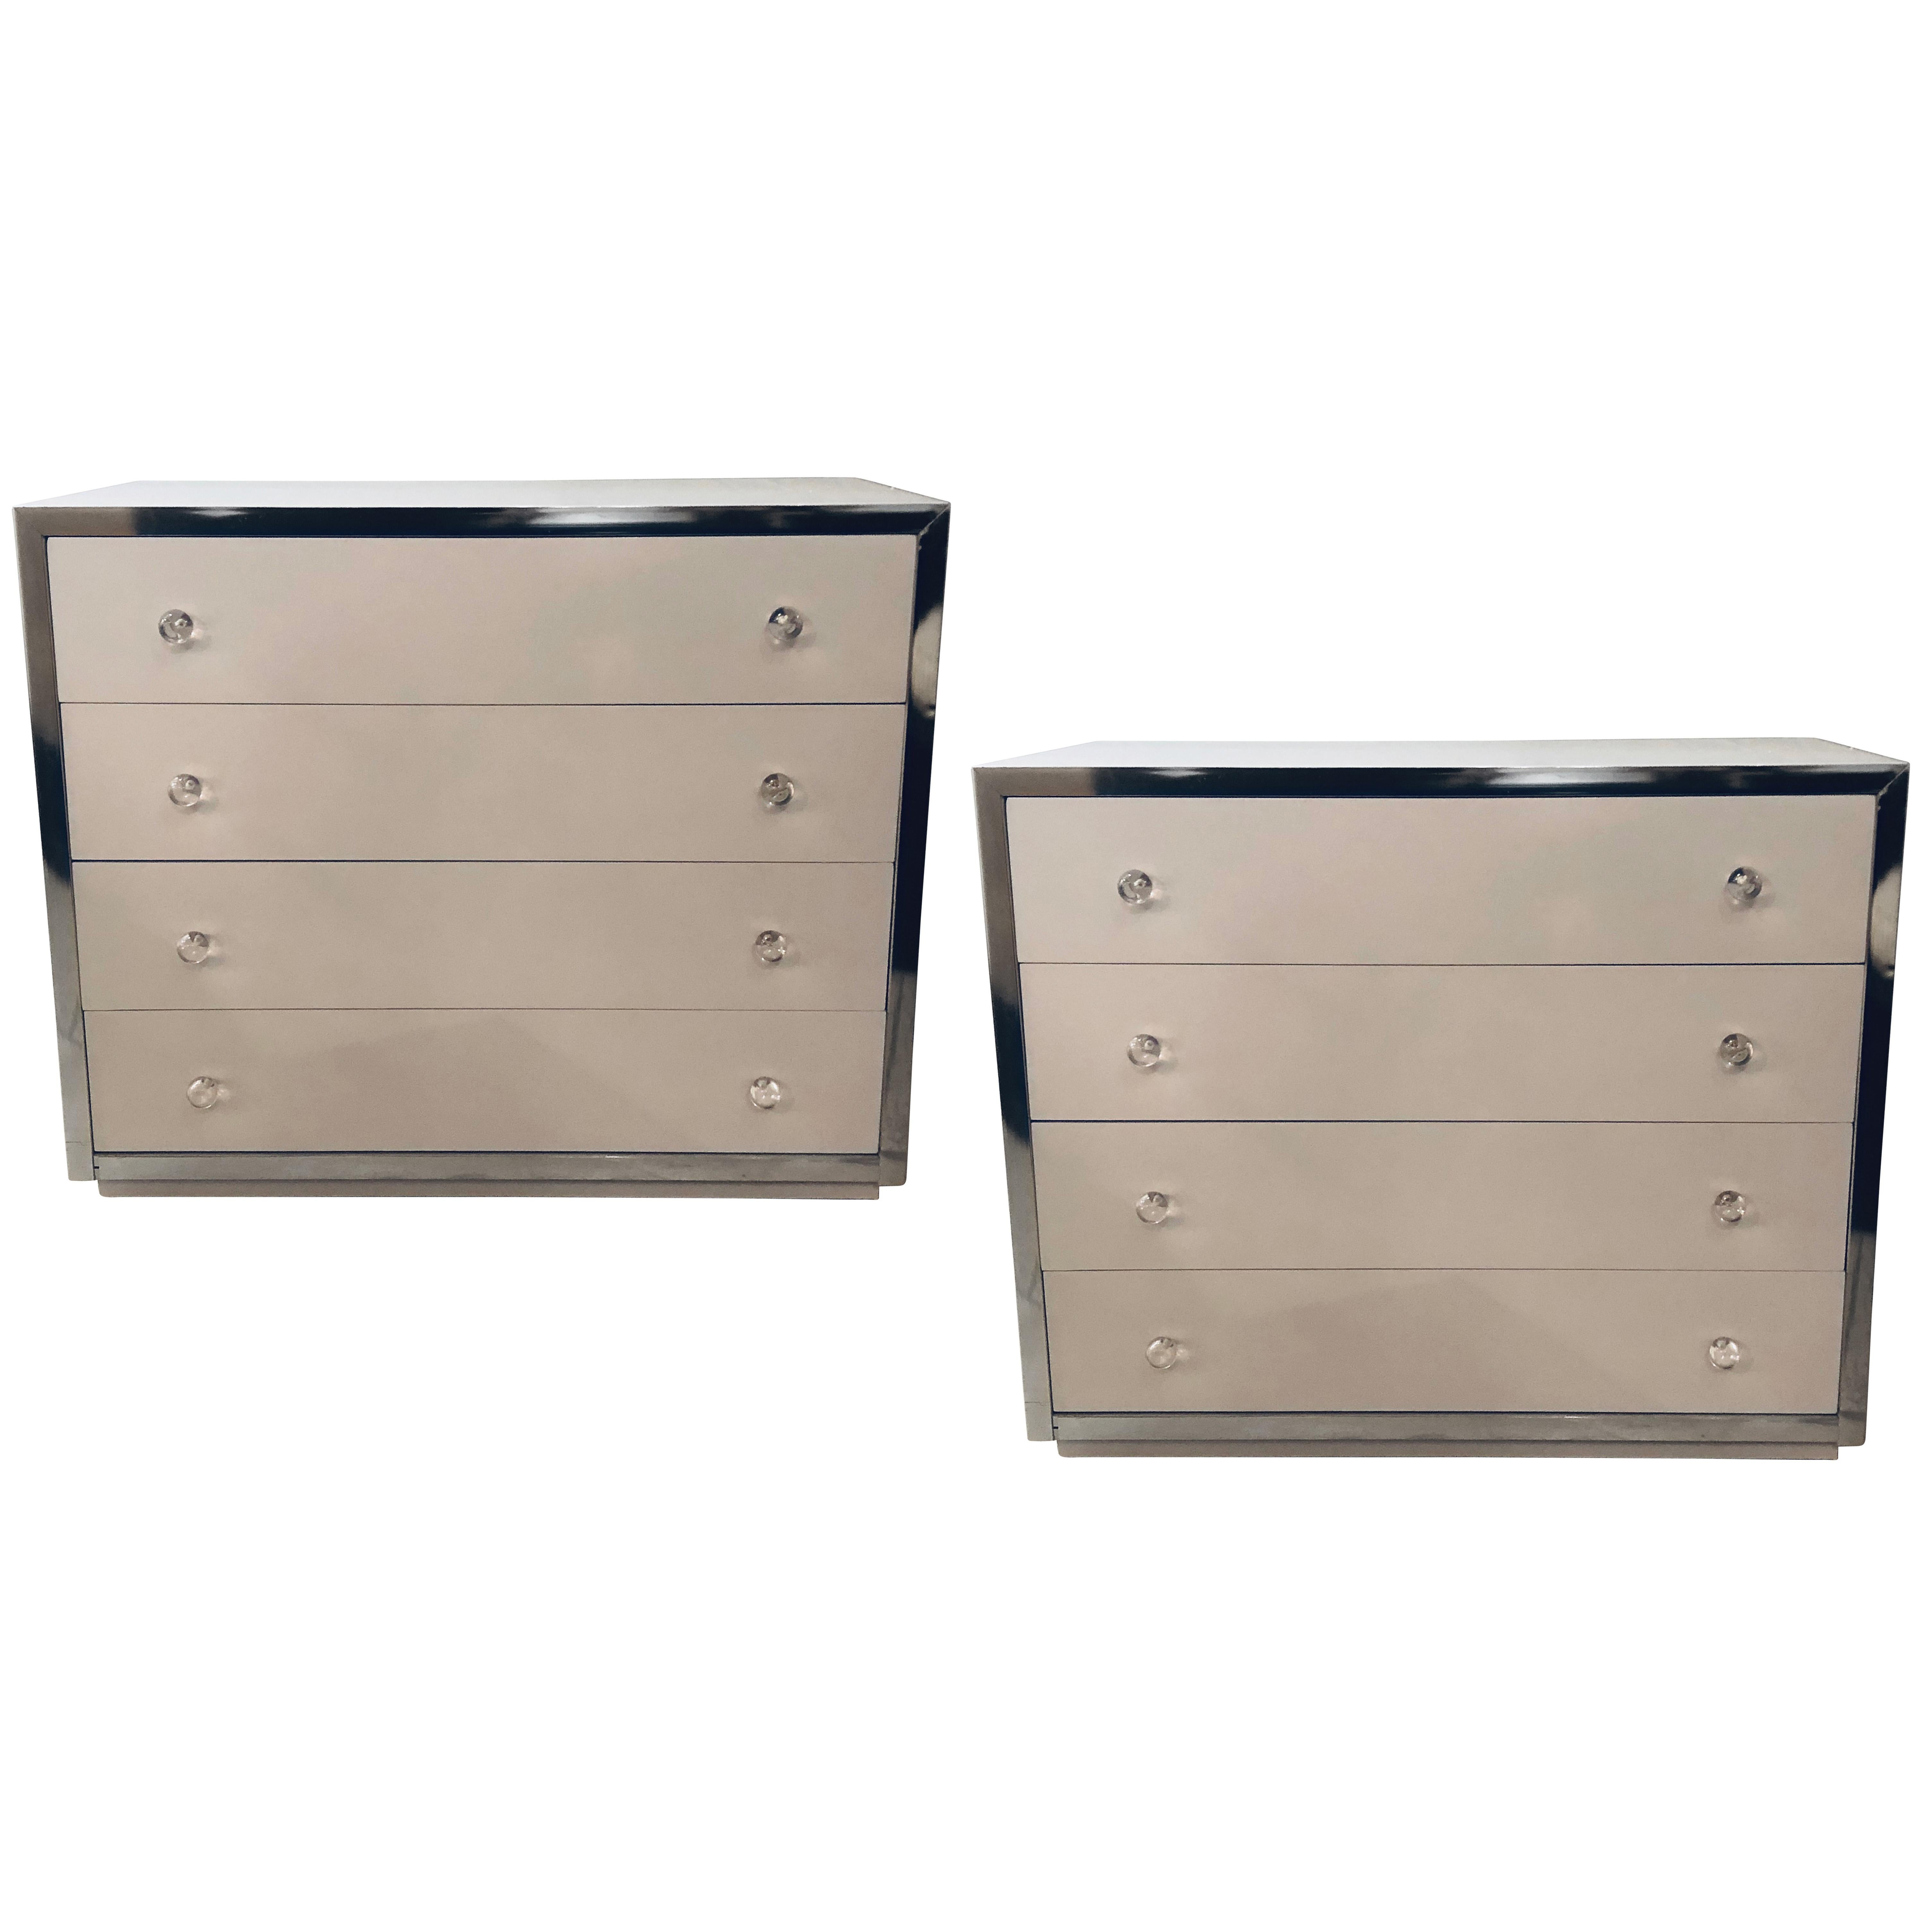 Pair of Mid-Century Modern Commodes Attributed to John Stuart